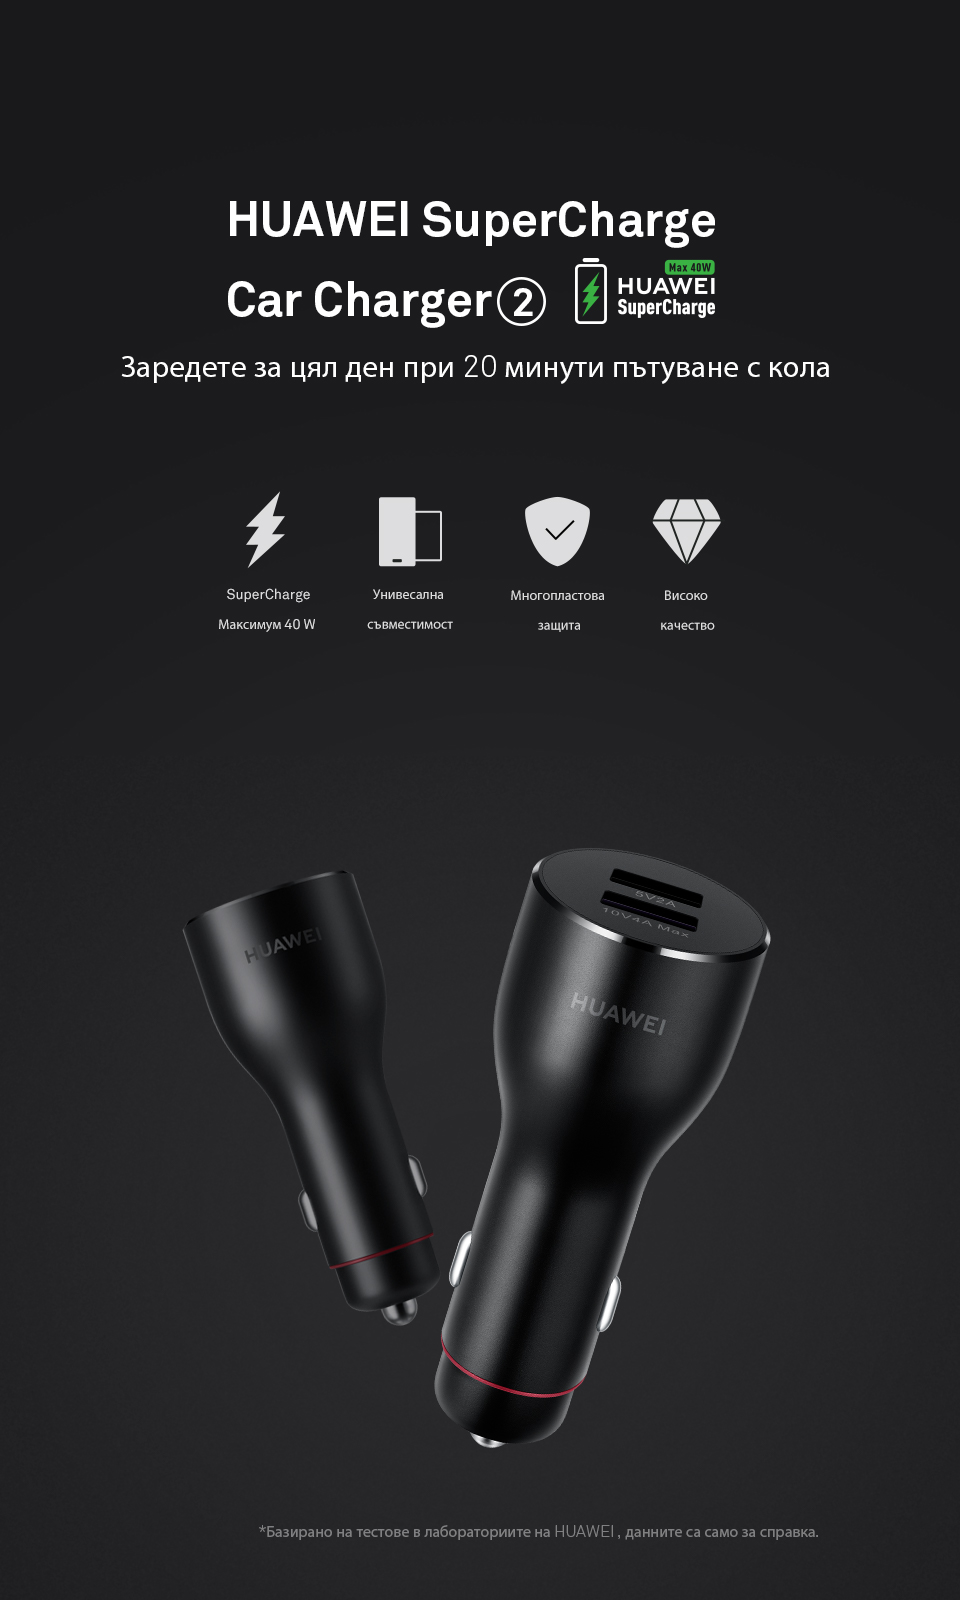 HUAWEI SuperCharge™ Car Charger 2